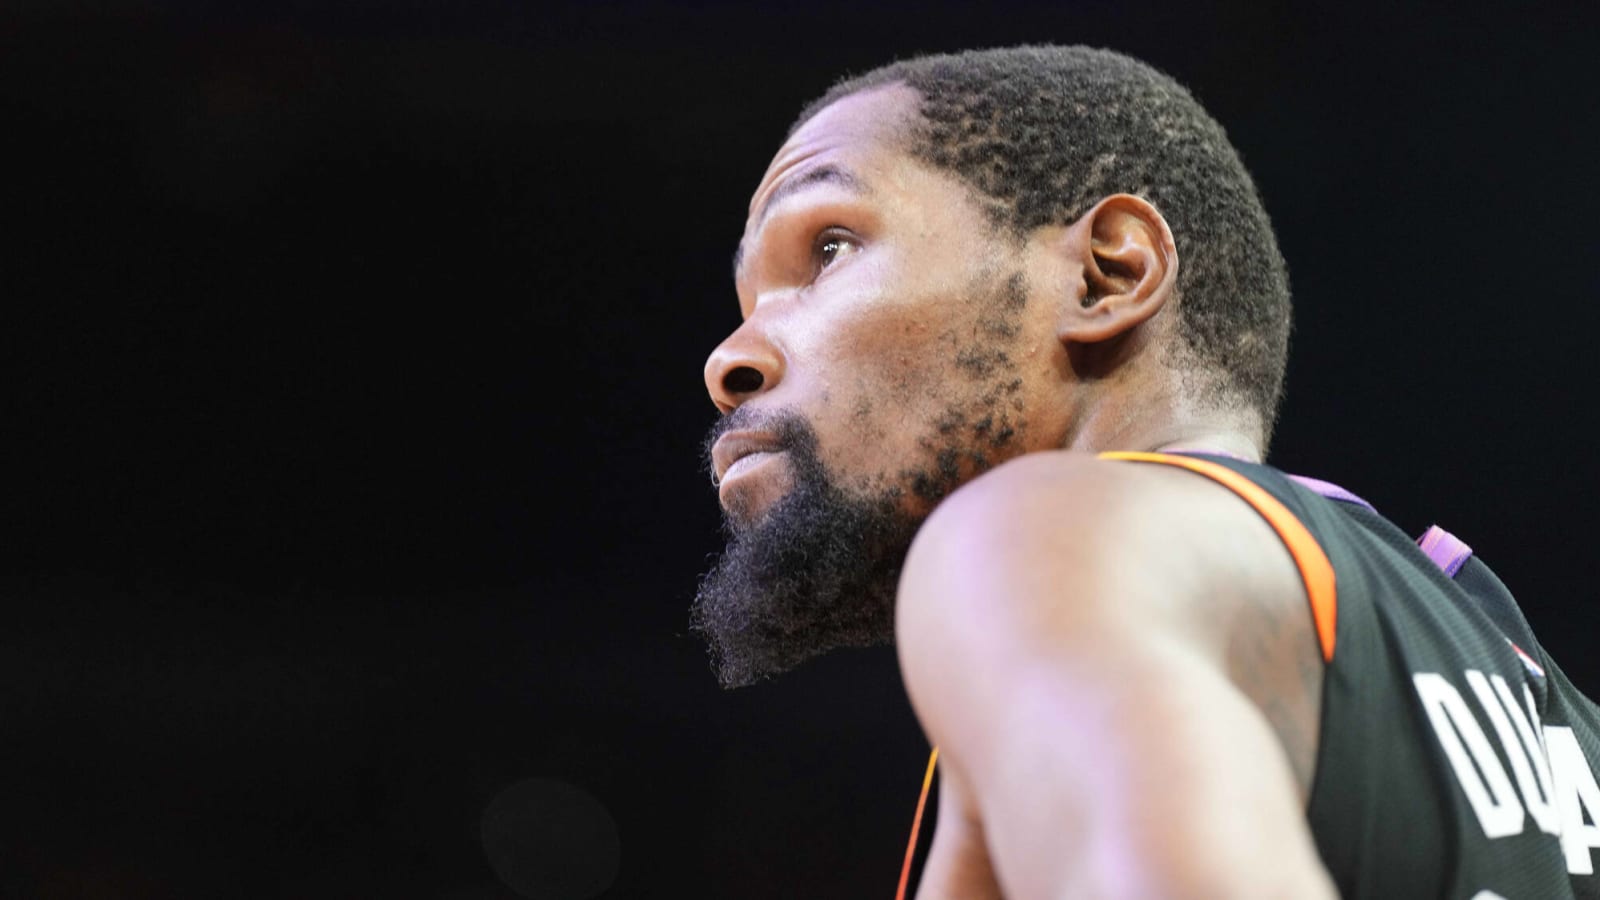 Kevin Durant receives shocking poll results regarding public perception among NBA fans